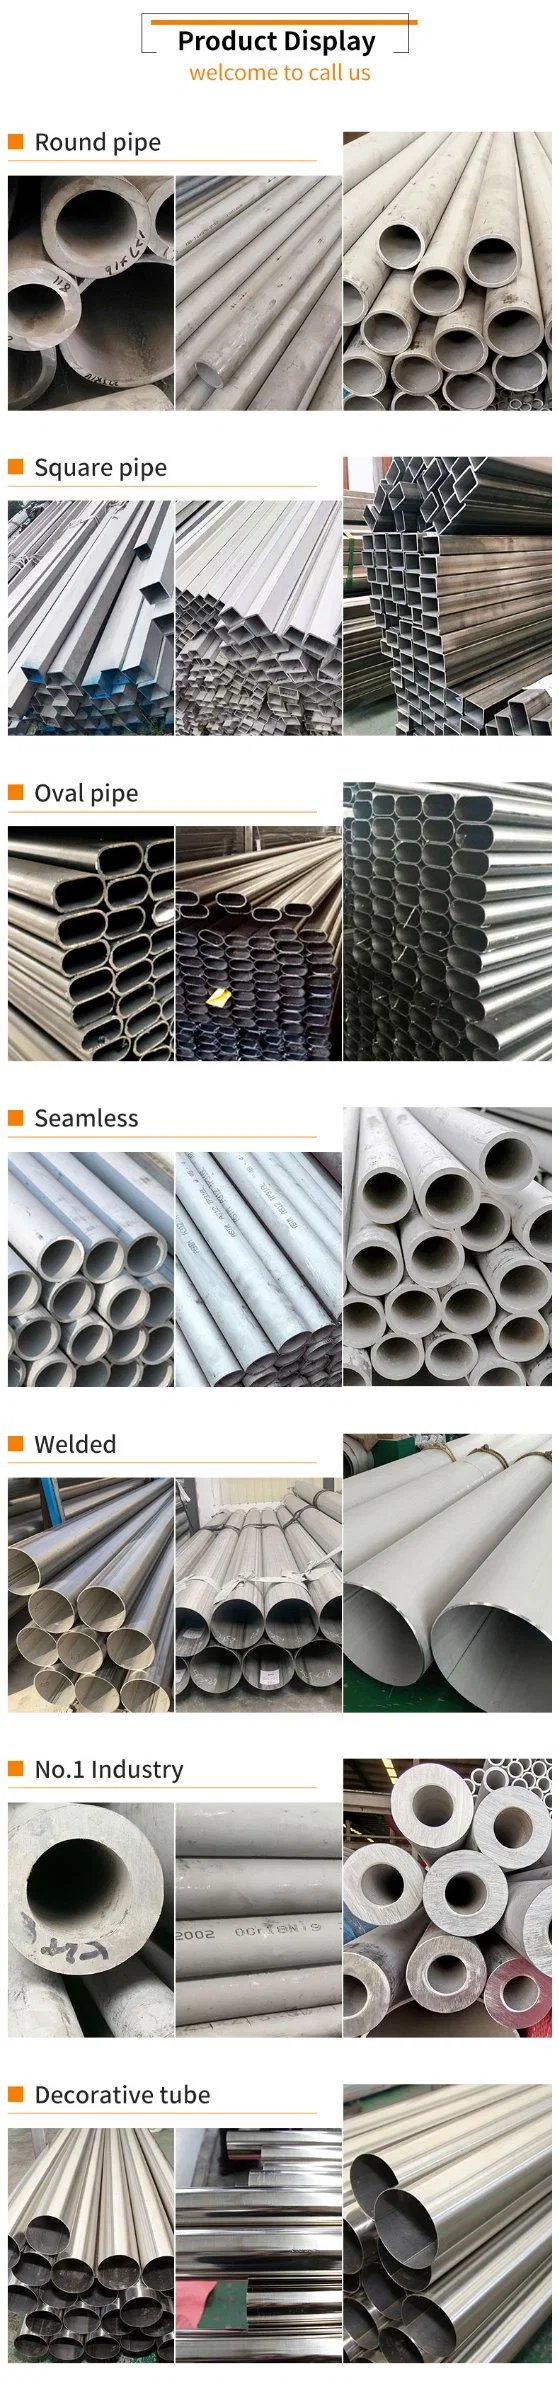 Hot ERW Spiral Welded Hollow Section Round Stainless Steel